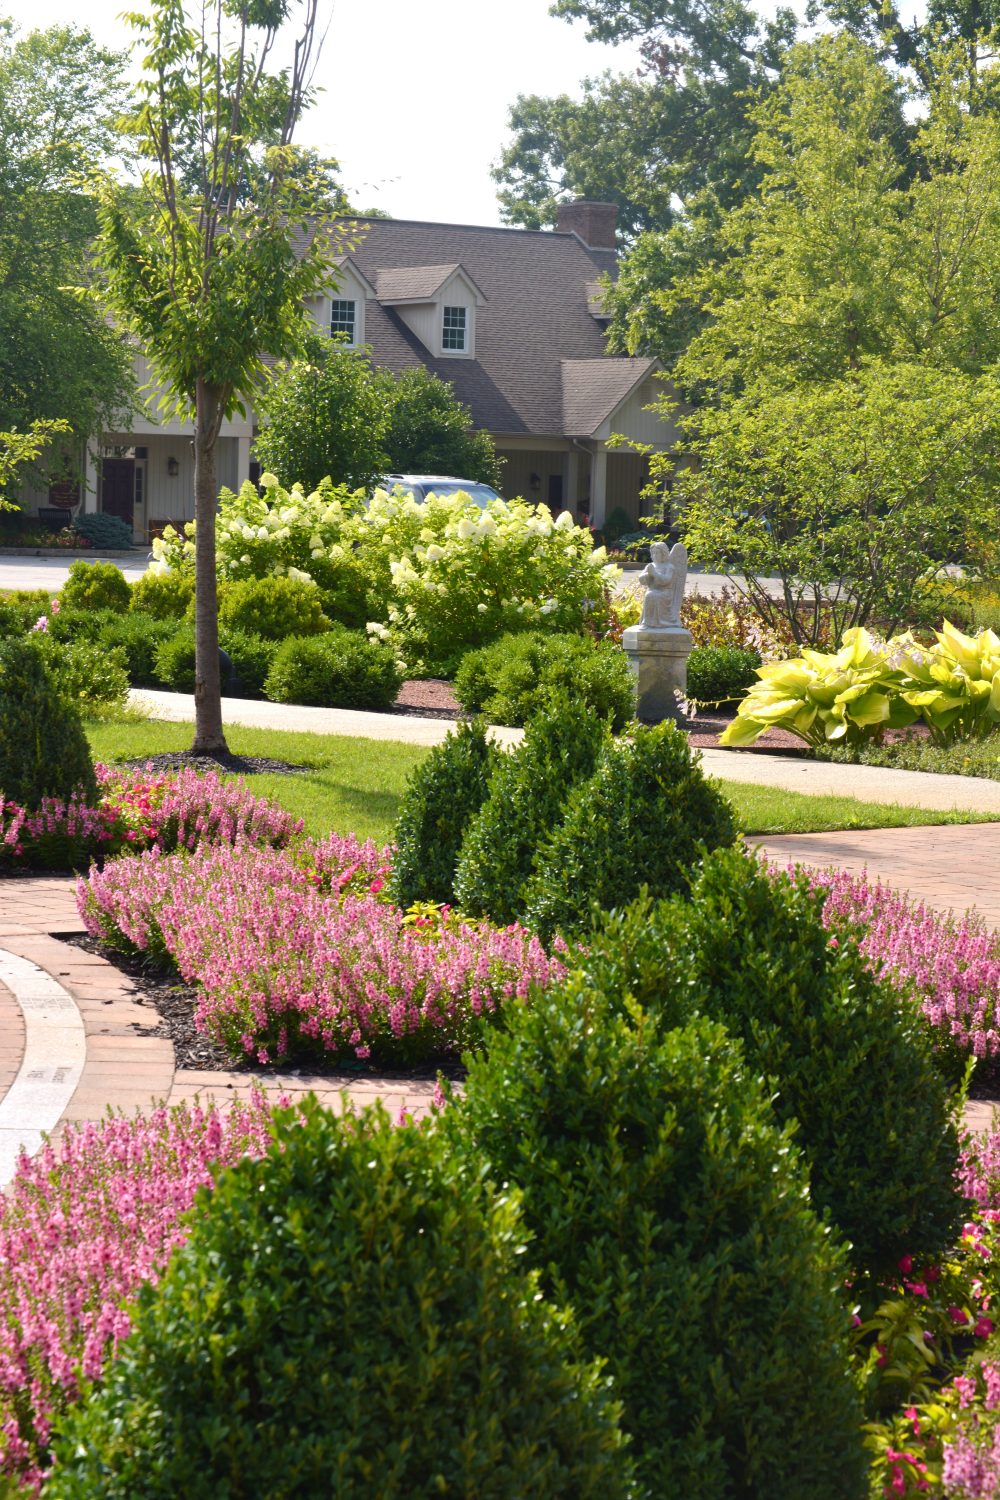 Trimmed shrubs and annuals